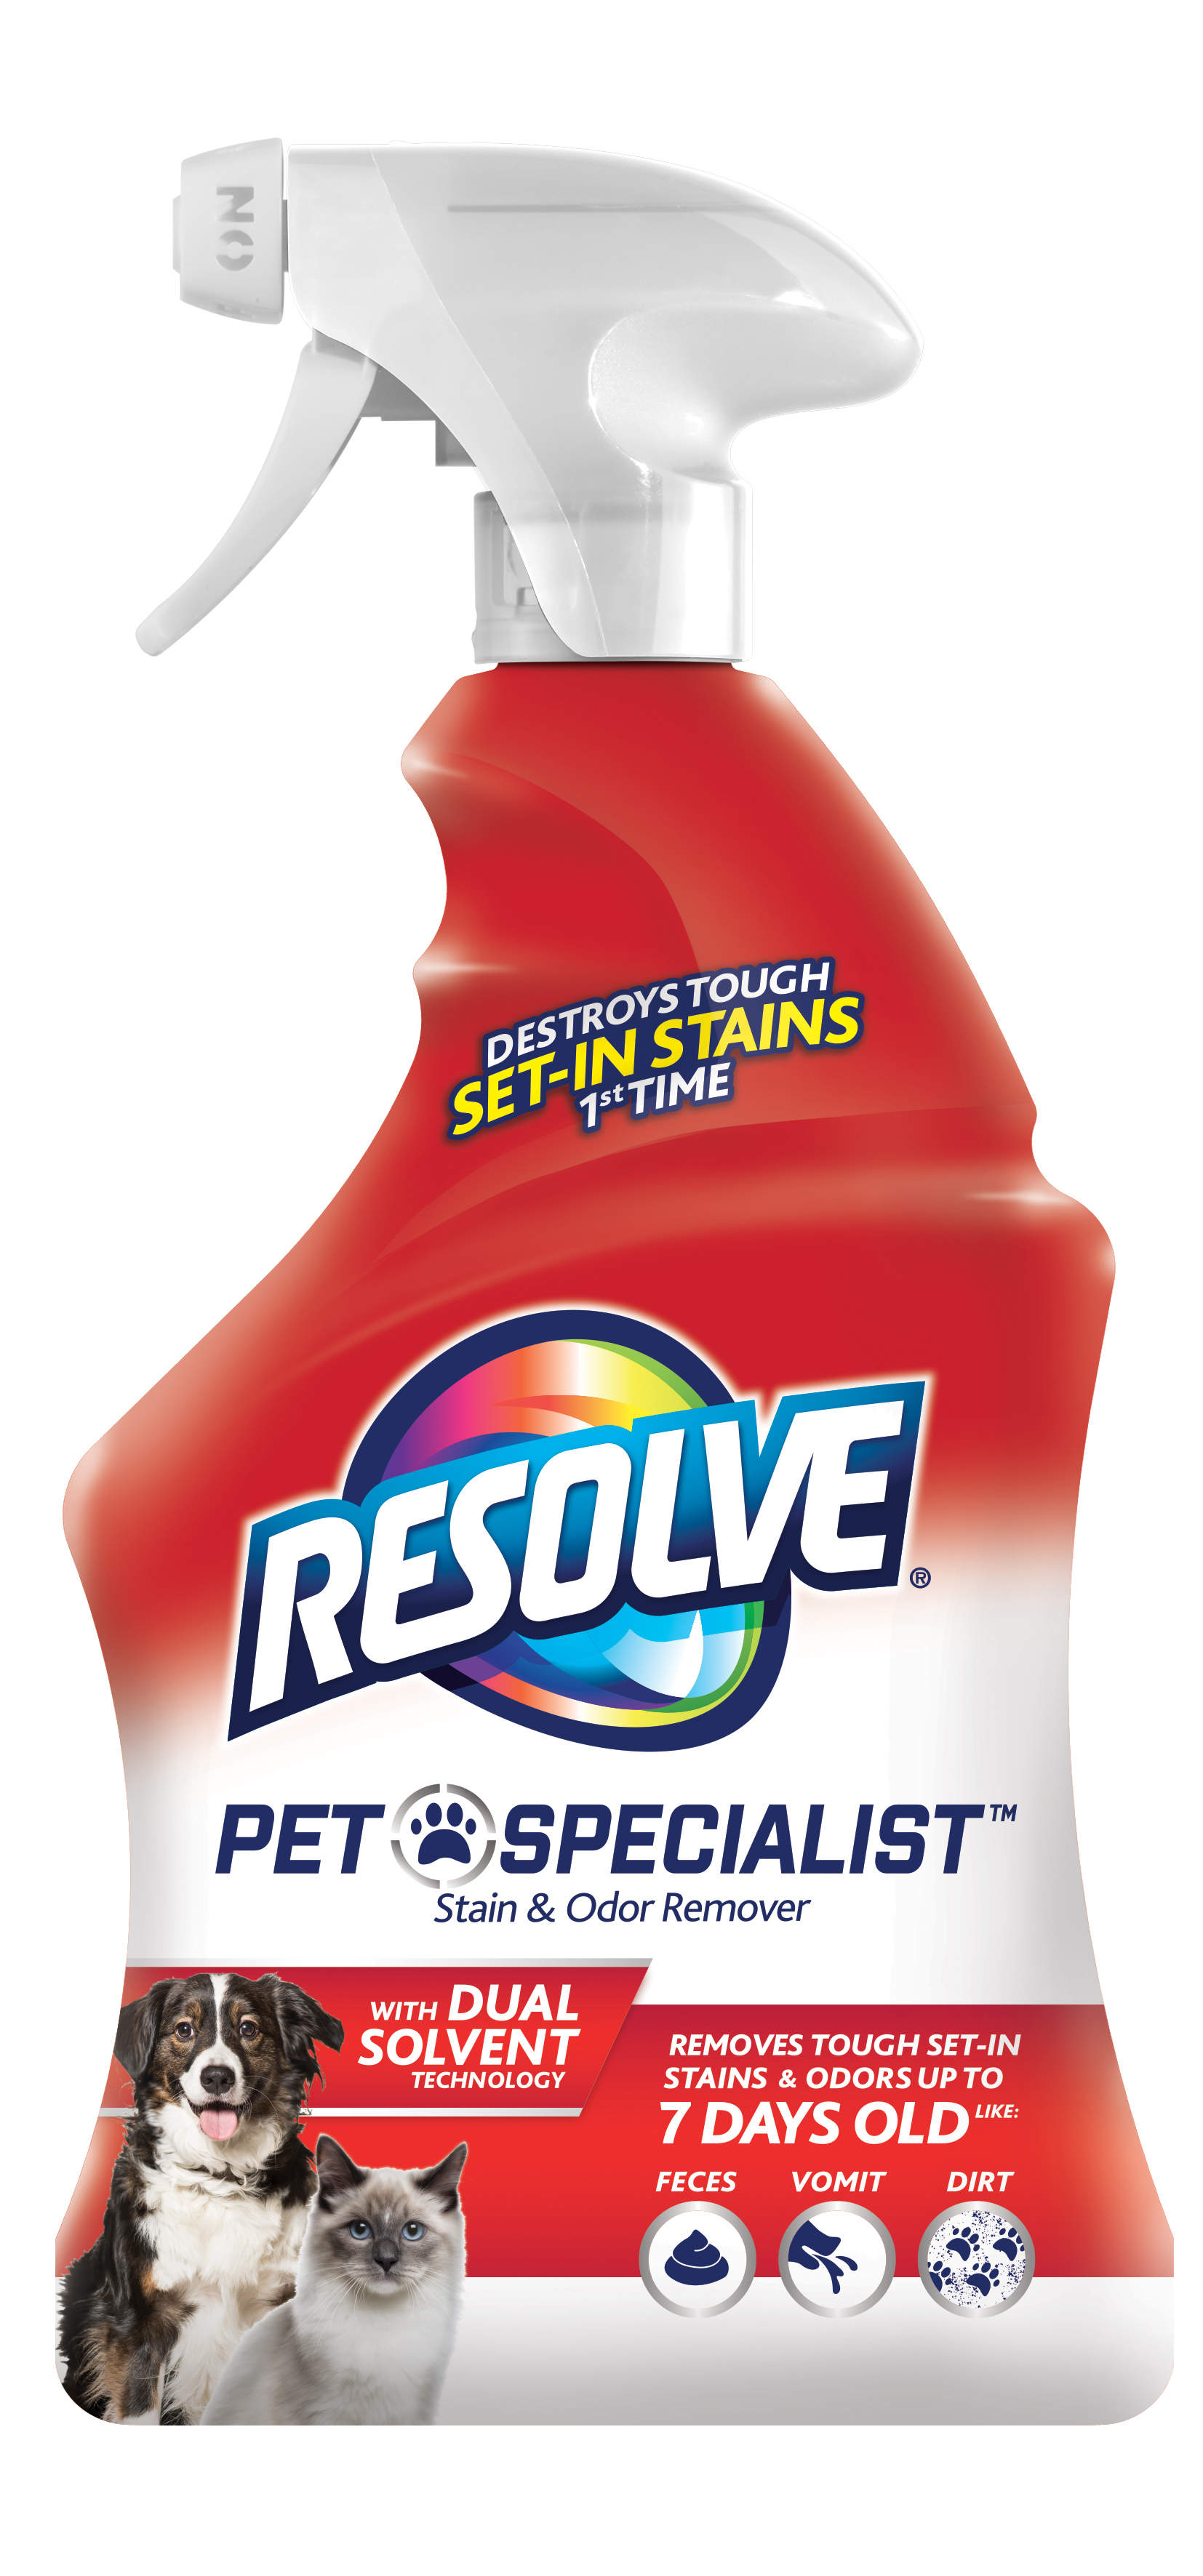 Resolve Spot Stain Remover Multi-Fabric Upholstery Cleaner Spray